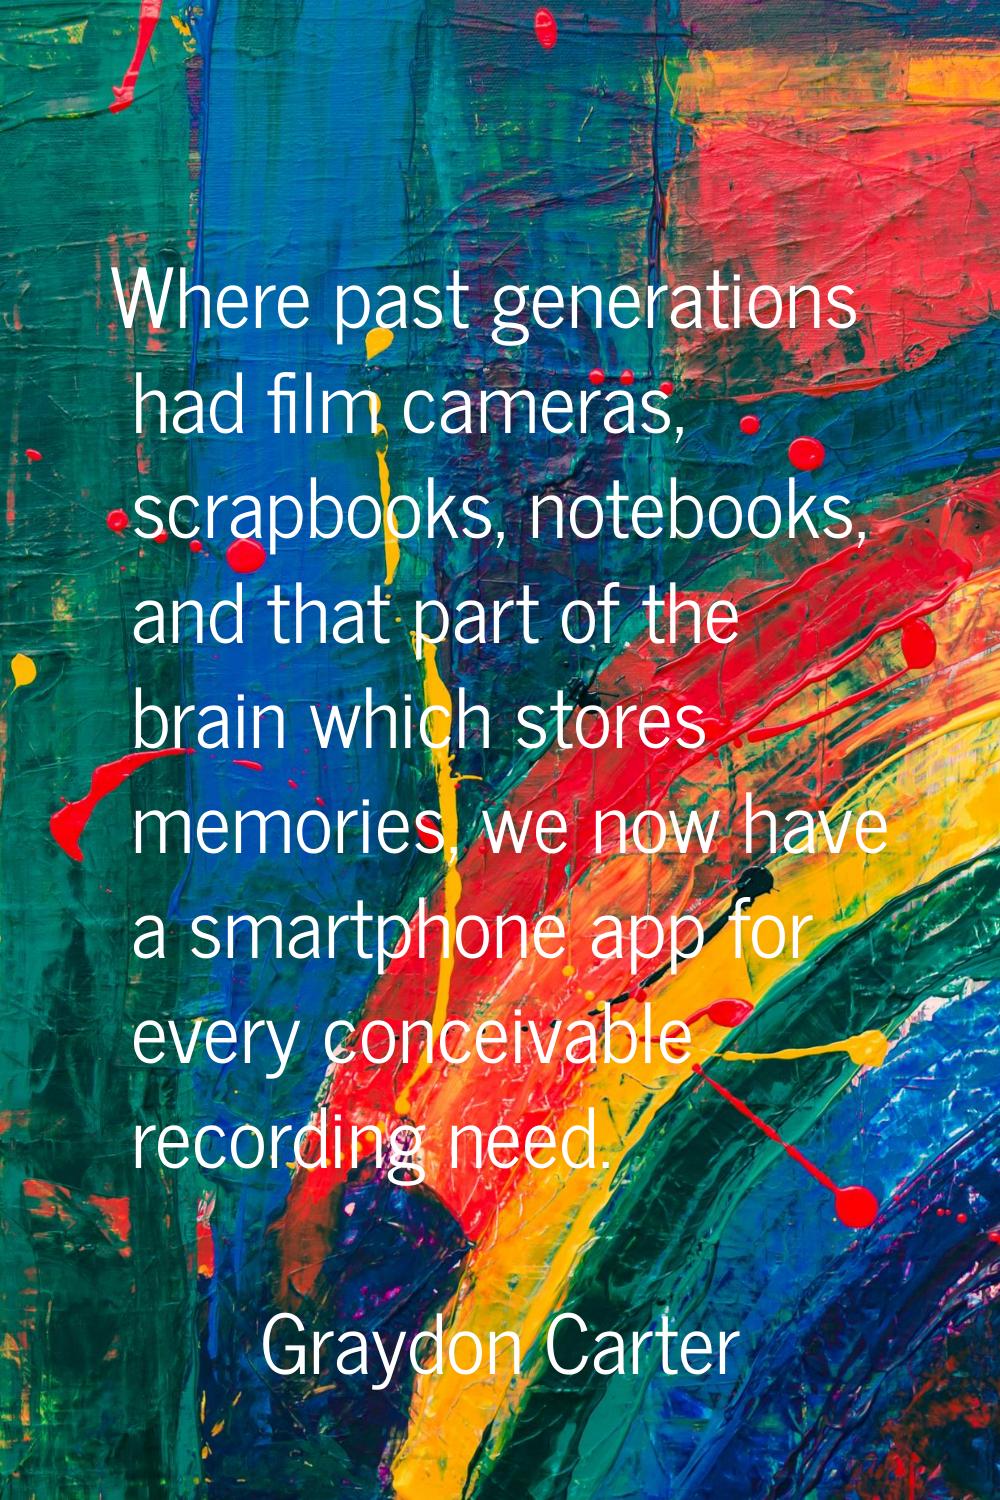 Where past generations had film cameras, scrapbooks, notebooks, and that part of the brain which st